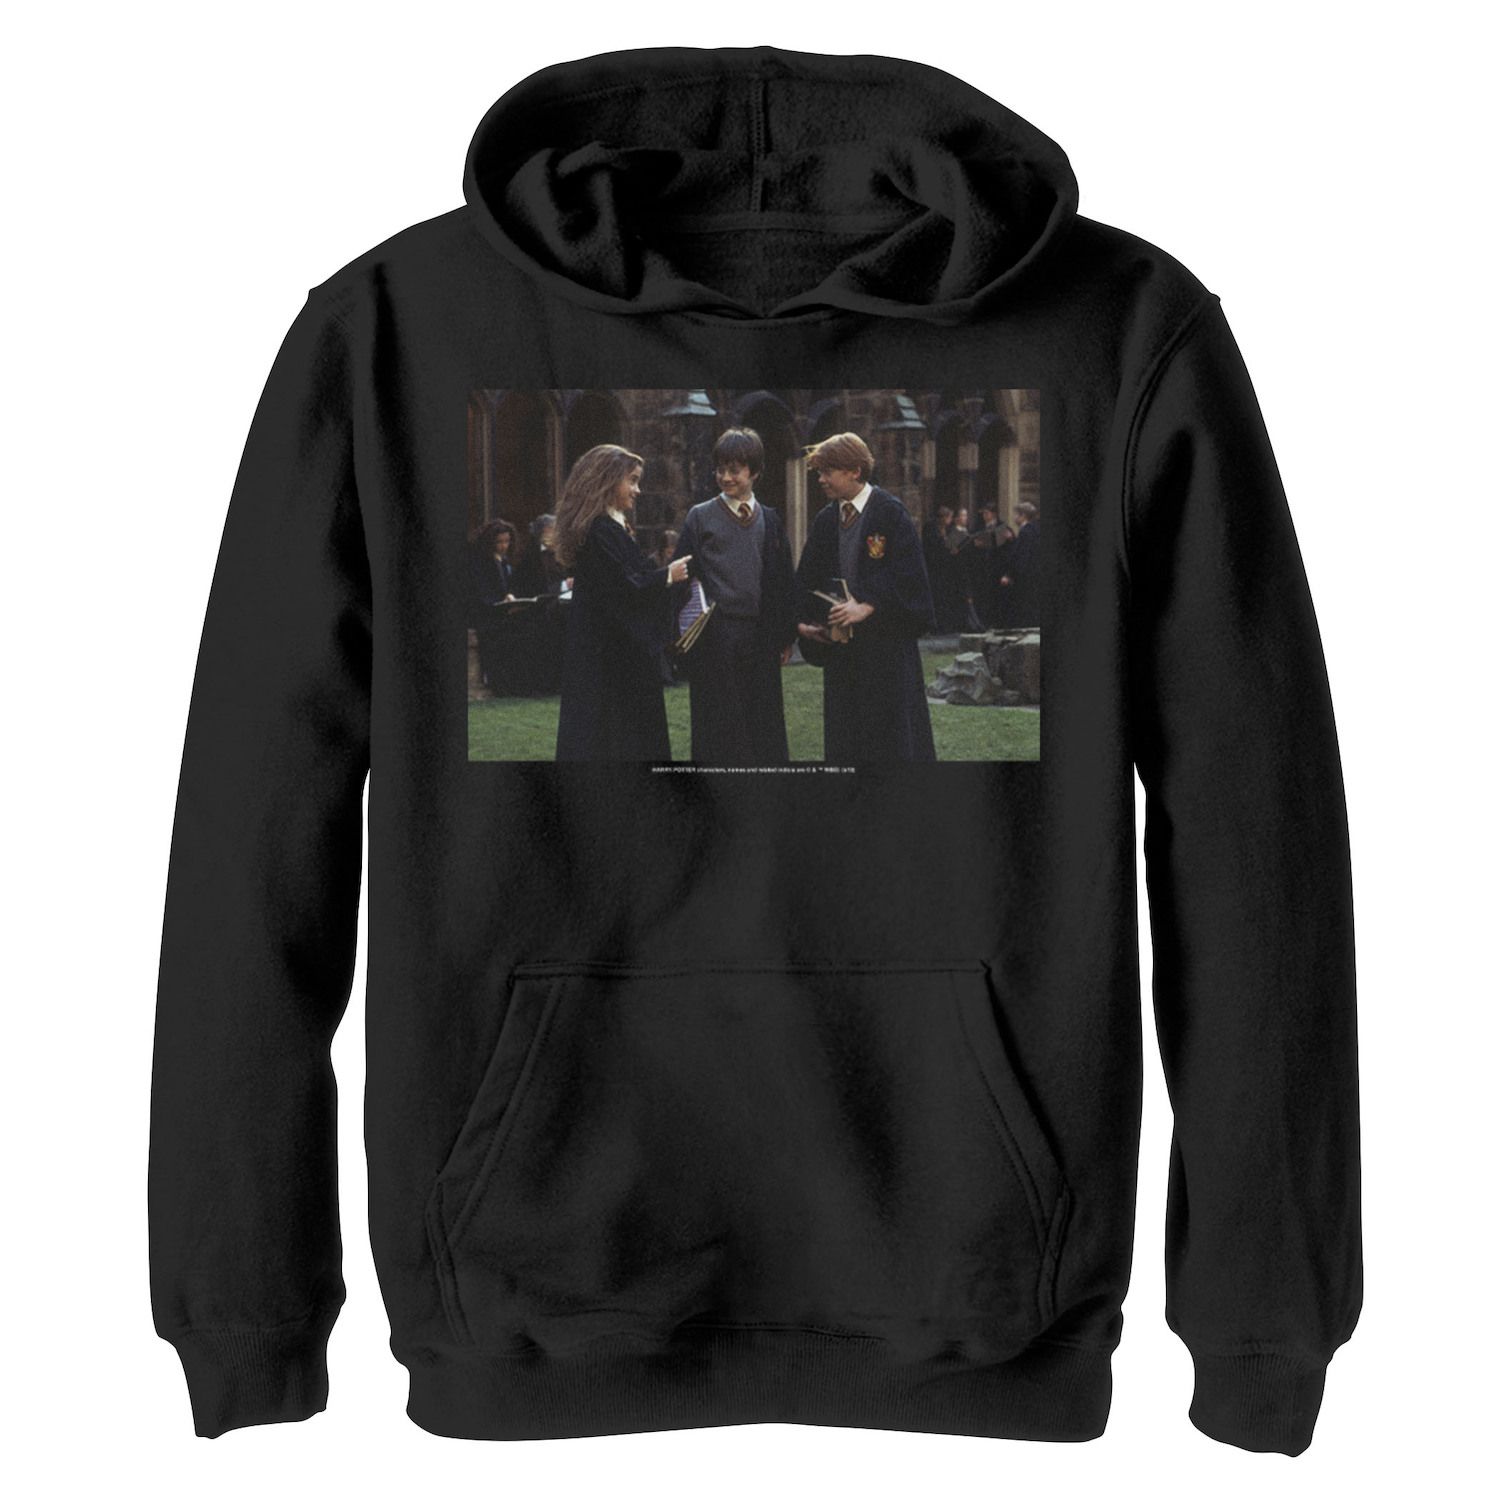 Image for Harry Potter Boys 8-20 Group Shot Portrait Graphic Fleece Hoodie at Kohl's.